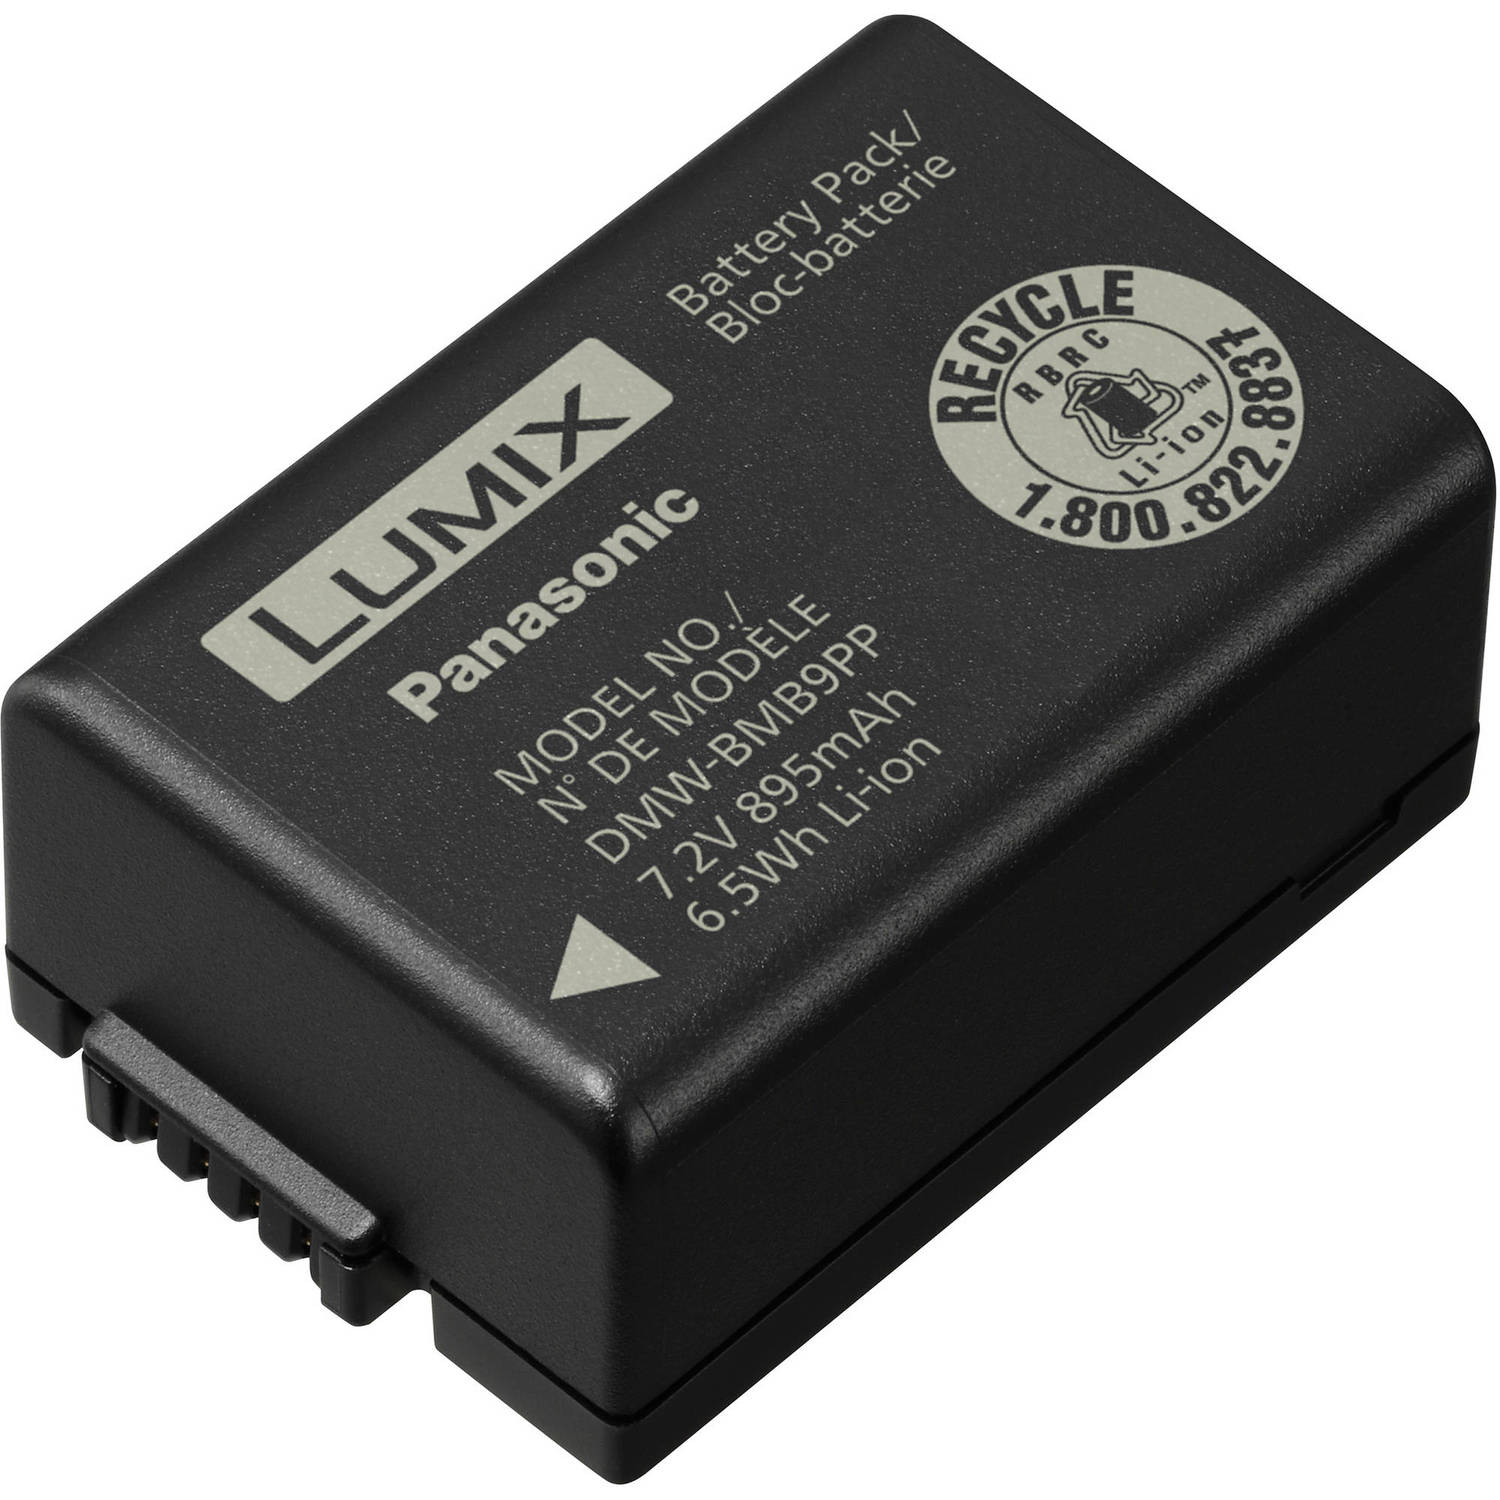 Panasonic DMW-BMB9 Rechargeable Battery For FZ100